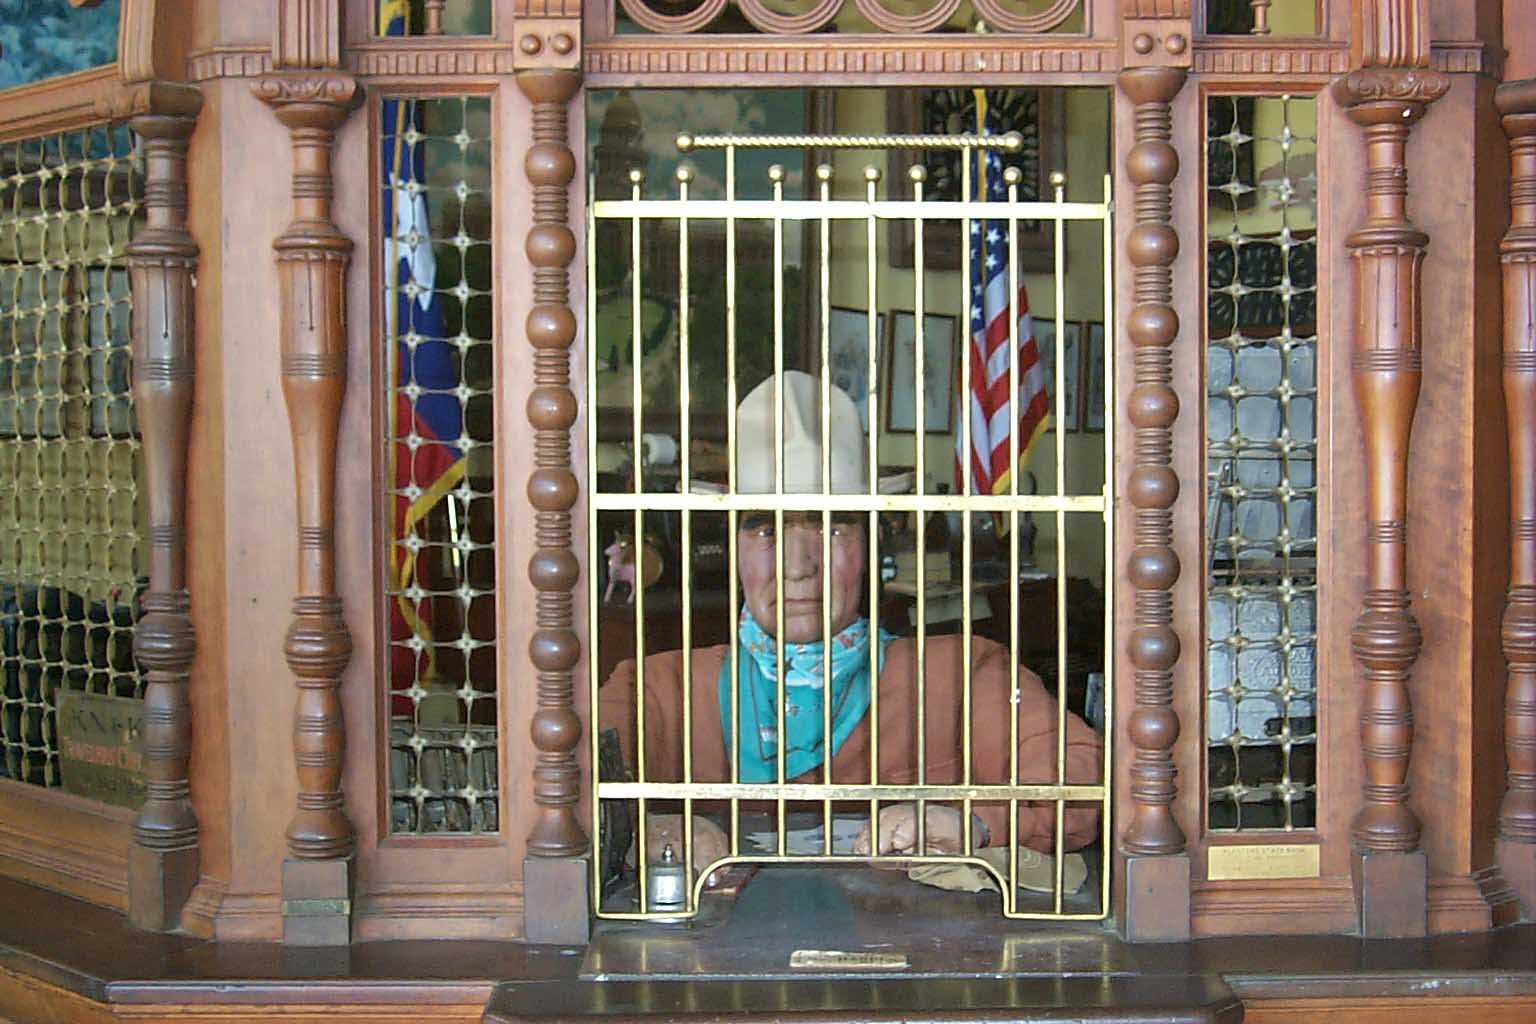 Here is another subsidary of the Judge's, the "Bean/Bottle/Boom State Bank. The bank takes care of the County Tresuary Funds, shown manning the teller window is the Judge's cousin "Woody."